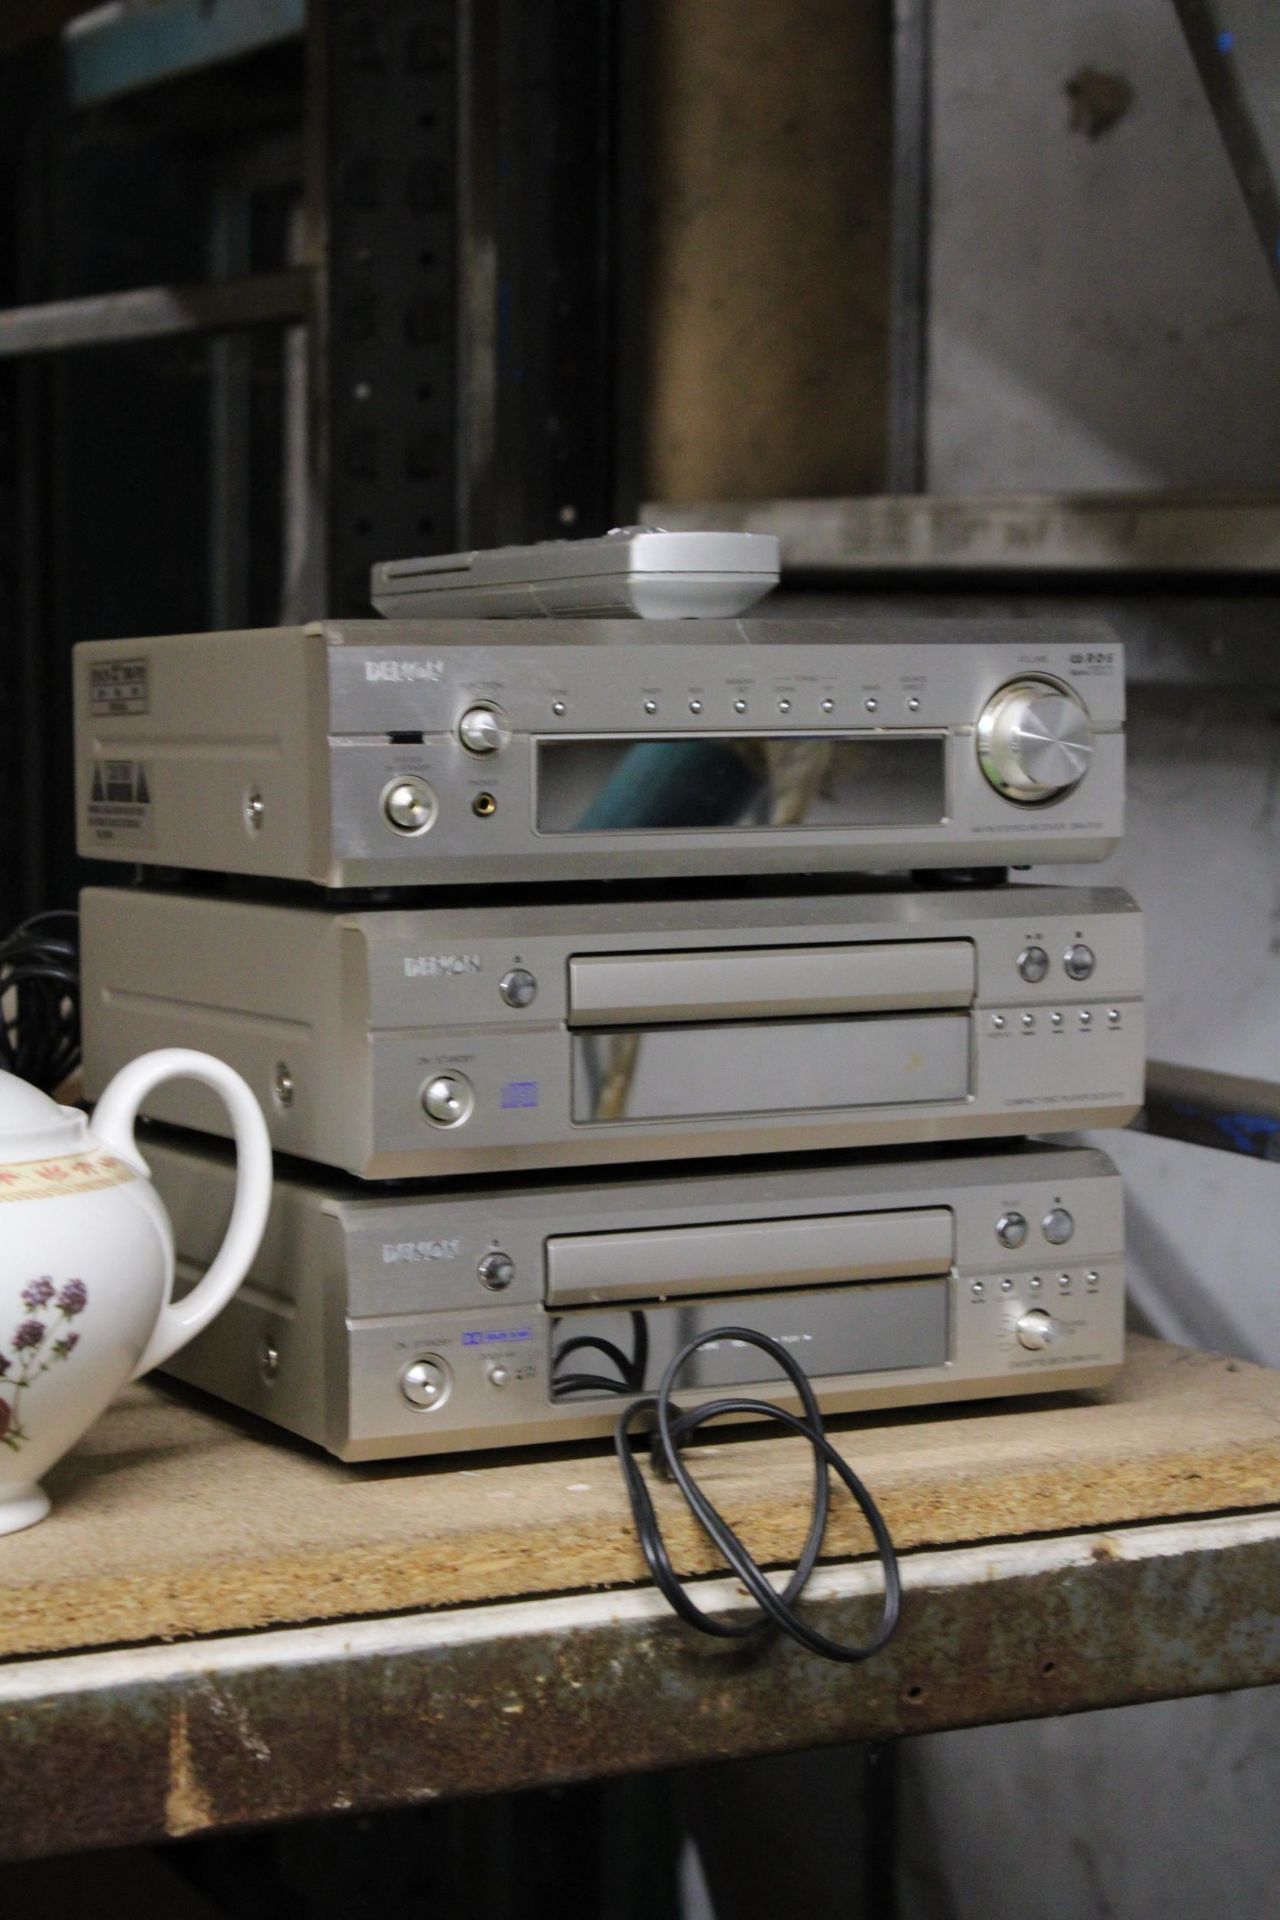 THREE RARE DENON SEPERATES WITH REMOTE CONTROL TO INCLUDE A STEREO RECEIVER, COMPACT DISC PLAYER AND - Image 2 of 4